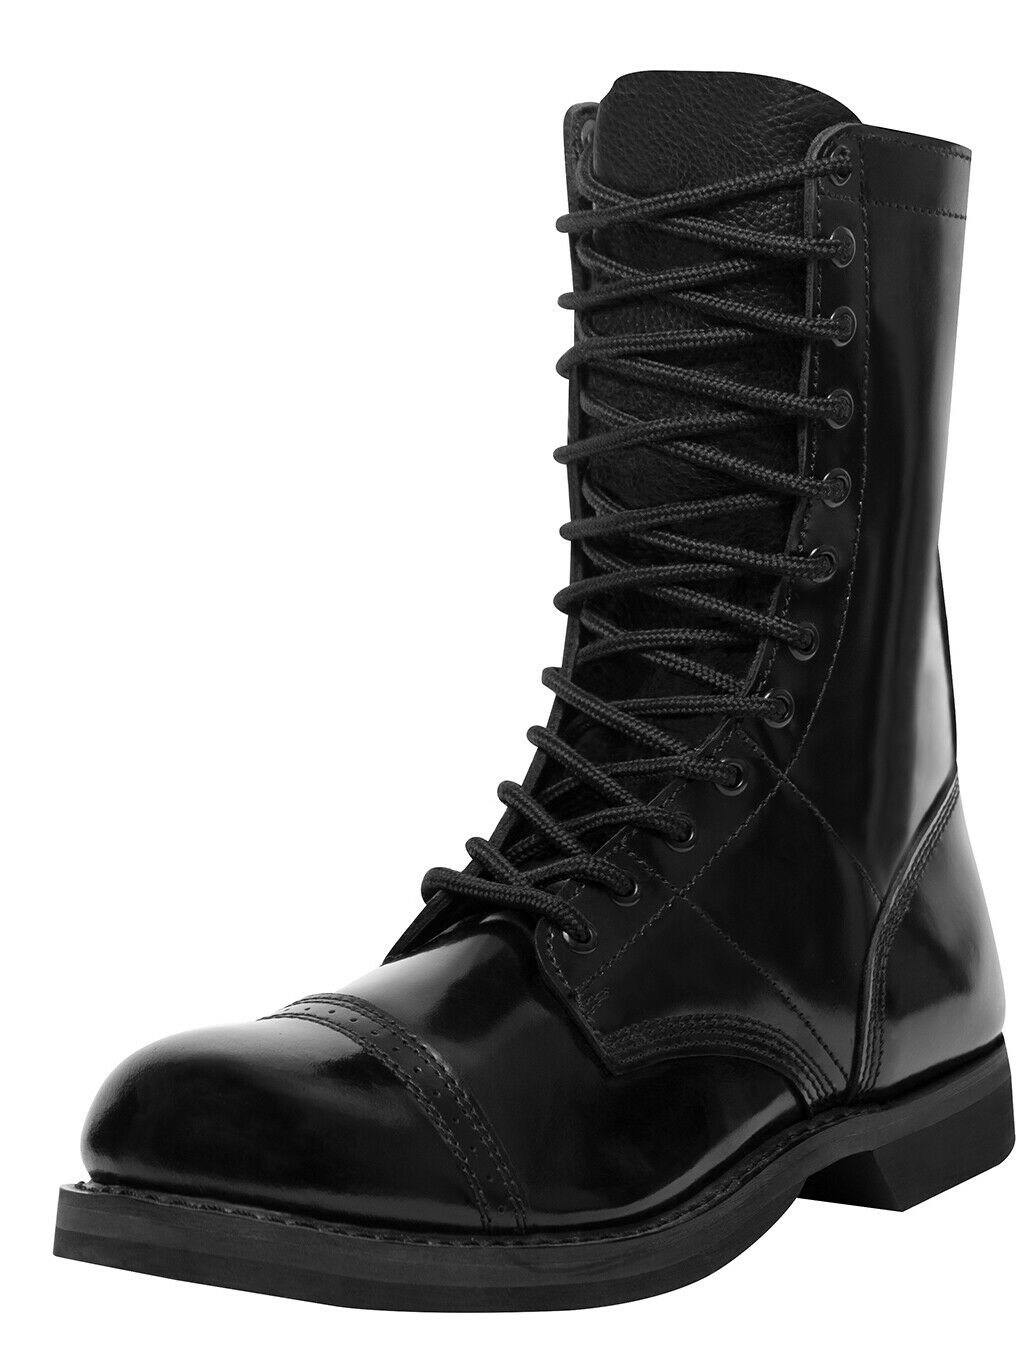 Rothco Leather Jump Boot - 10 Inch